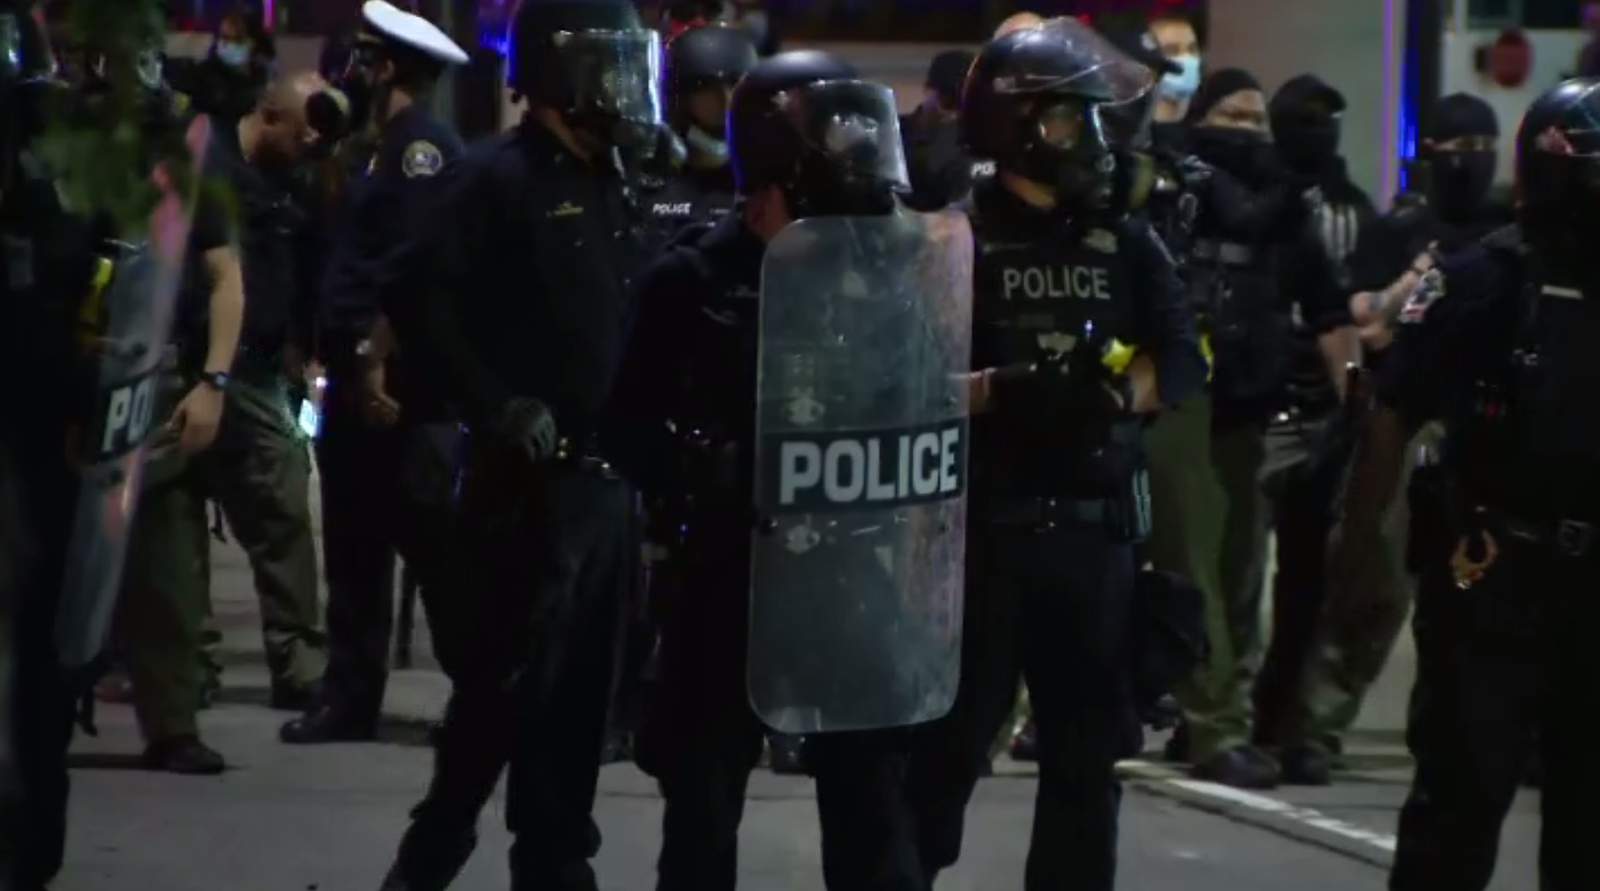 21-year-old man shot, killed during protests in Downtown Detroit